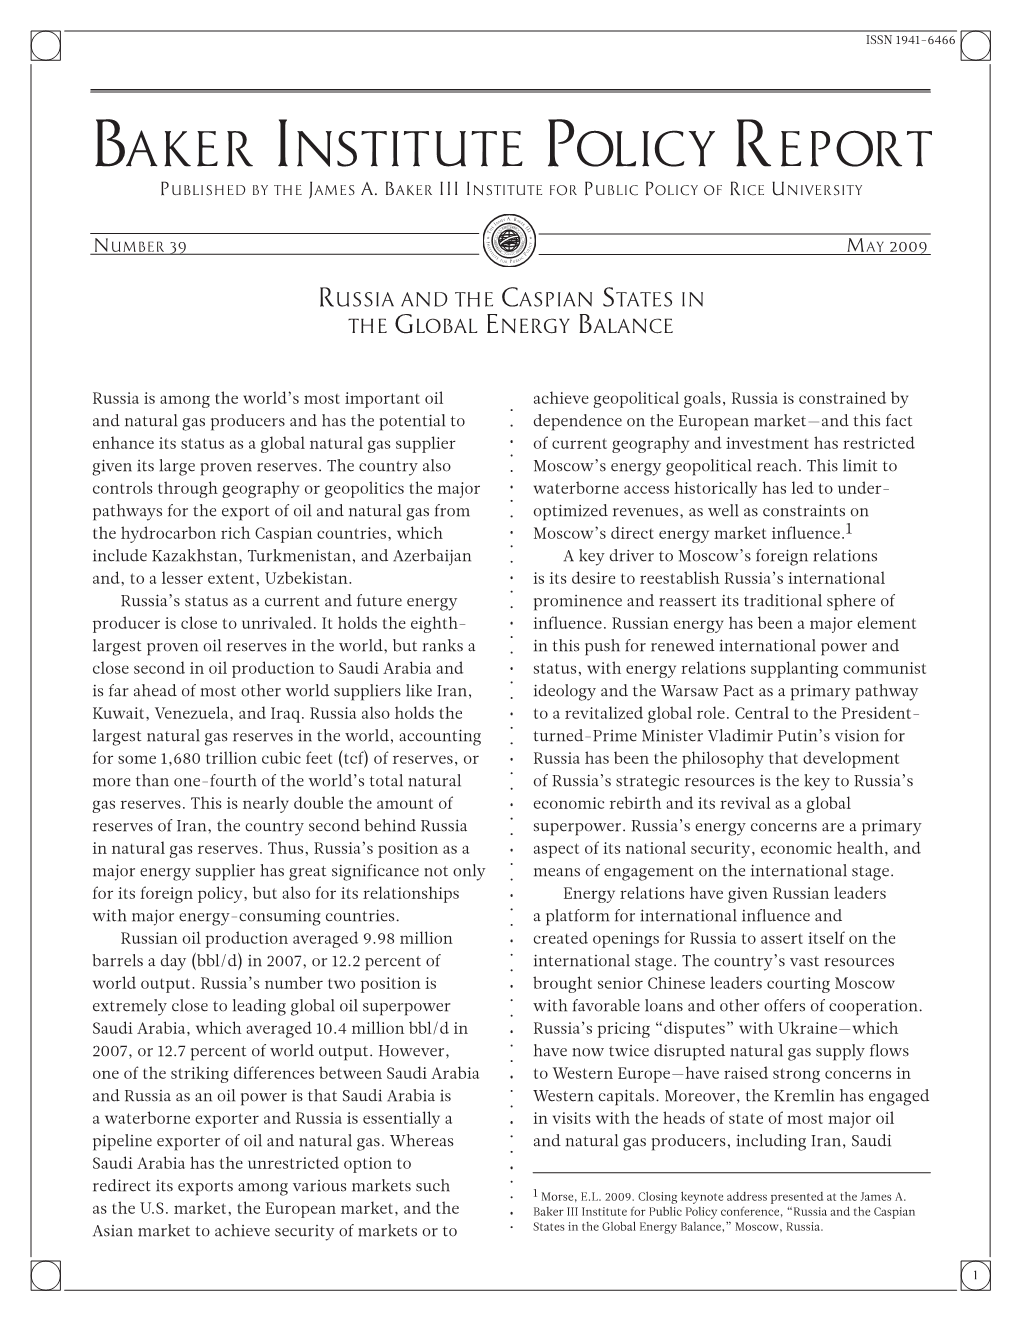 Baker Institute Policy Report